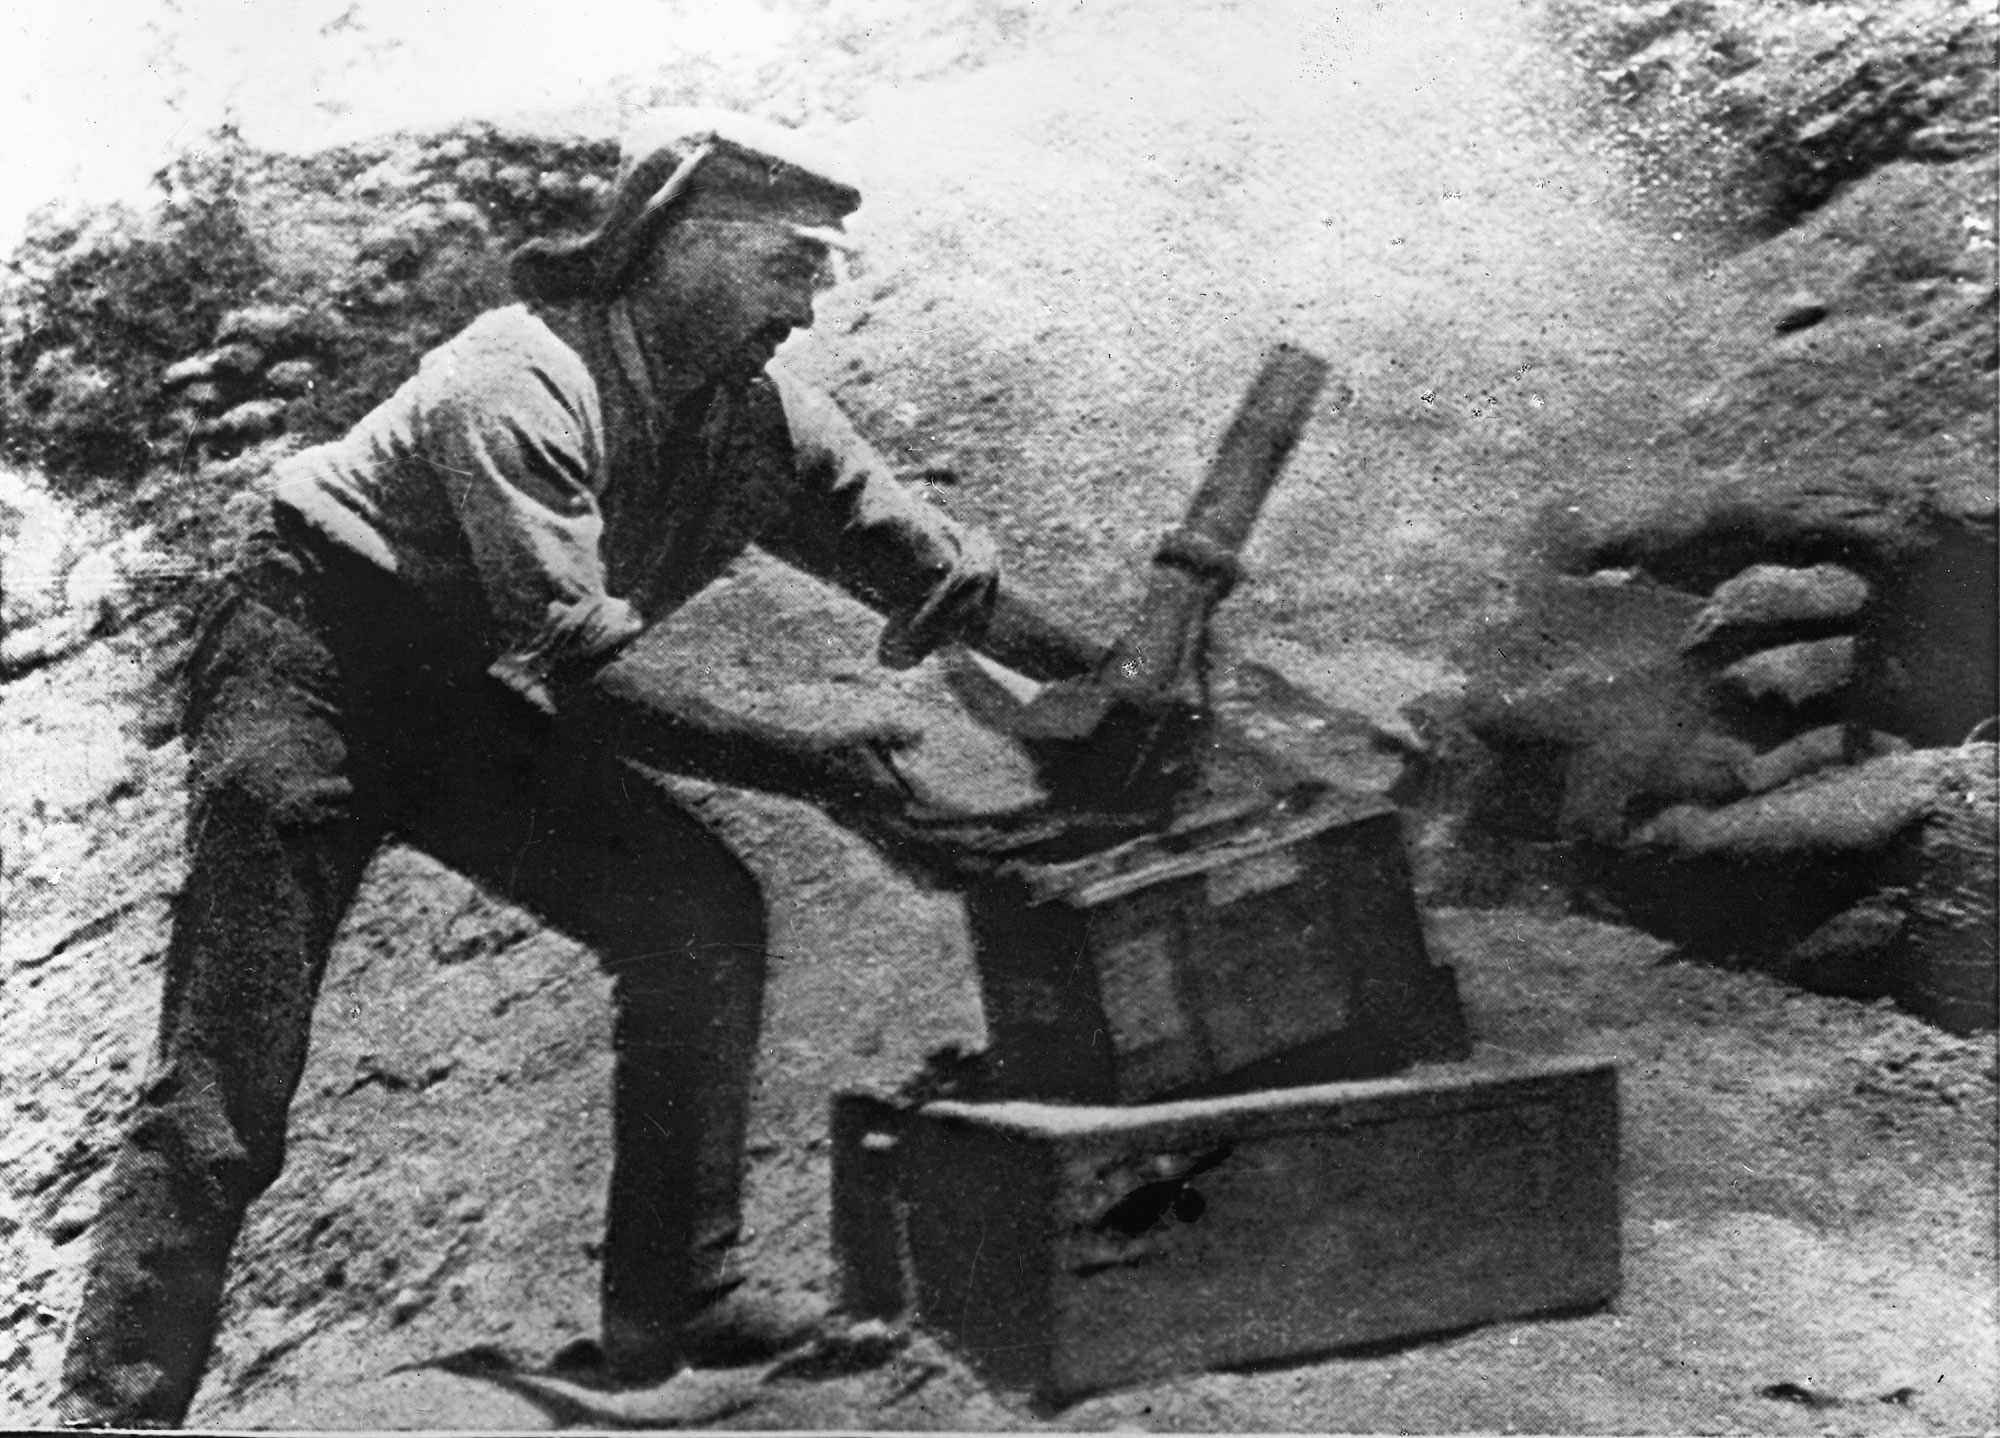 A trench mortar (used to launch explosives) in action on the Gallipoli Peninsula.